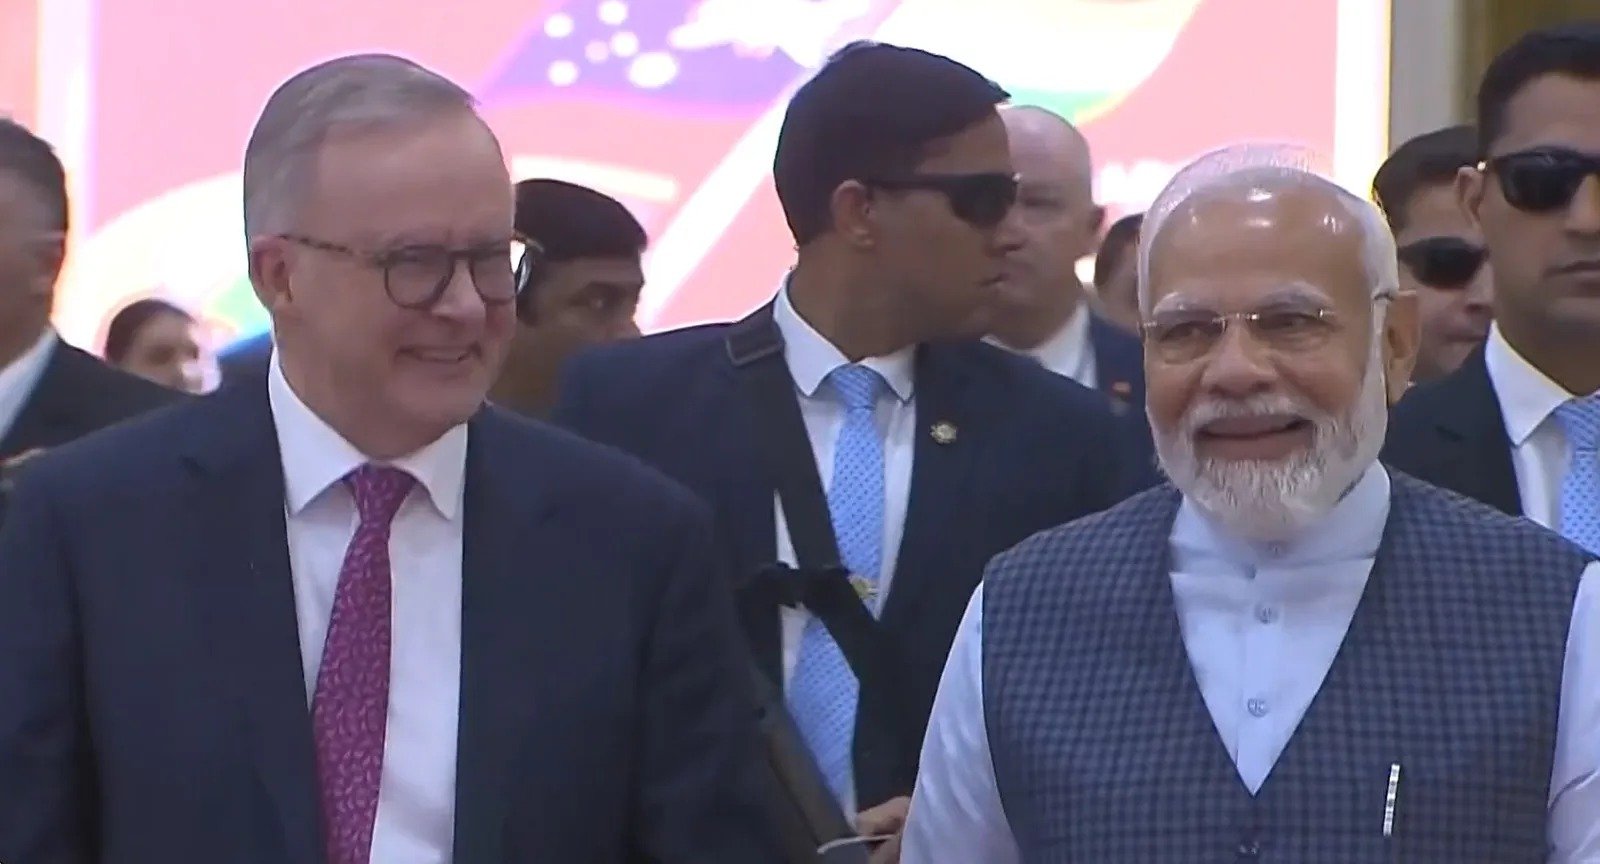 PM Modi and Anthony Albanese watch india vs AUS 4th test Match